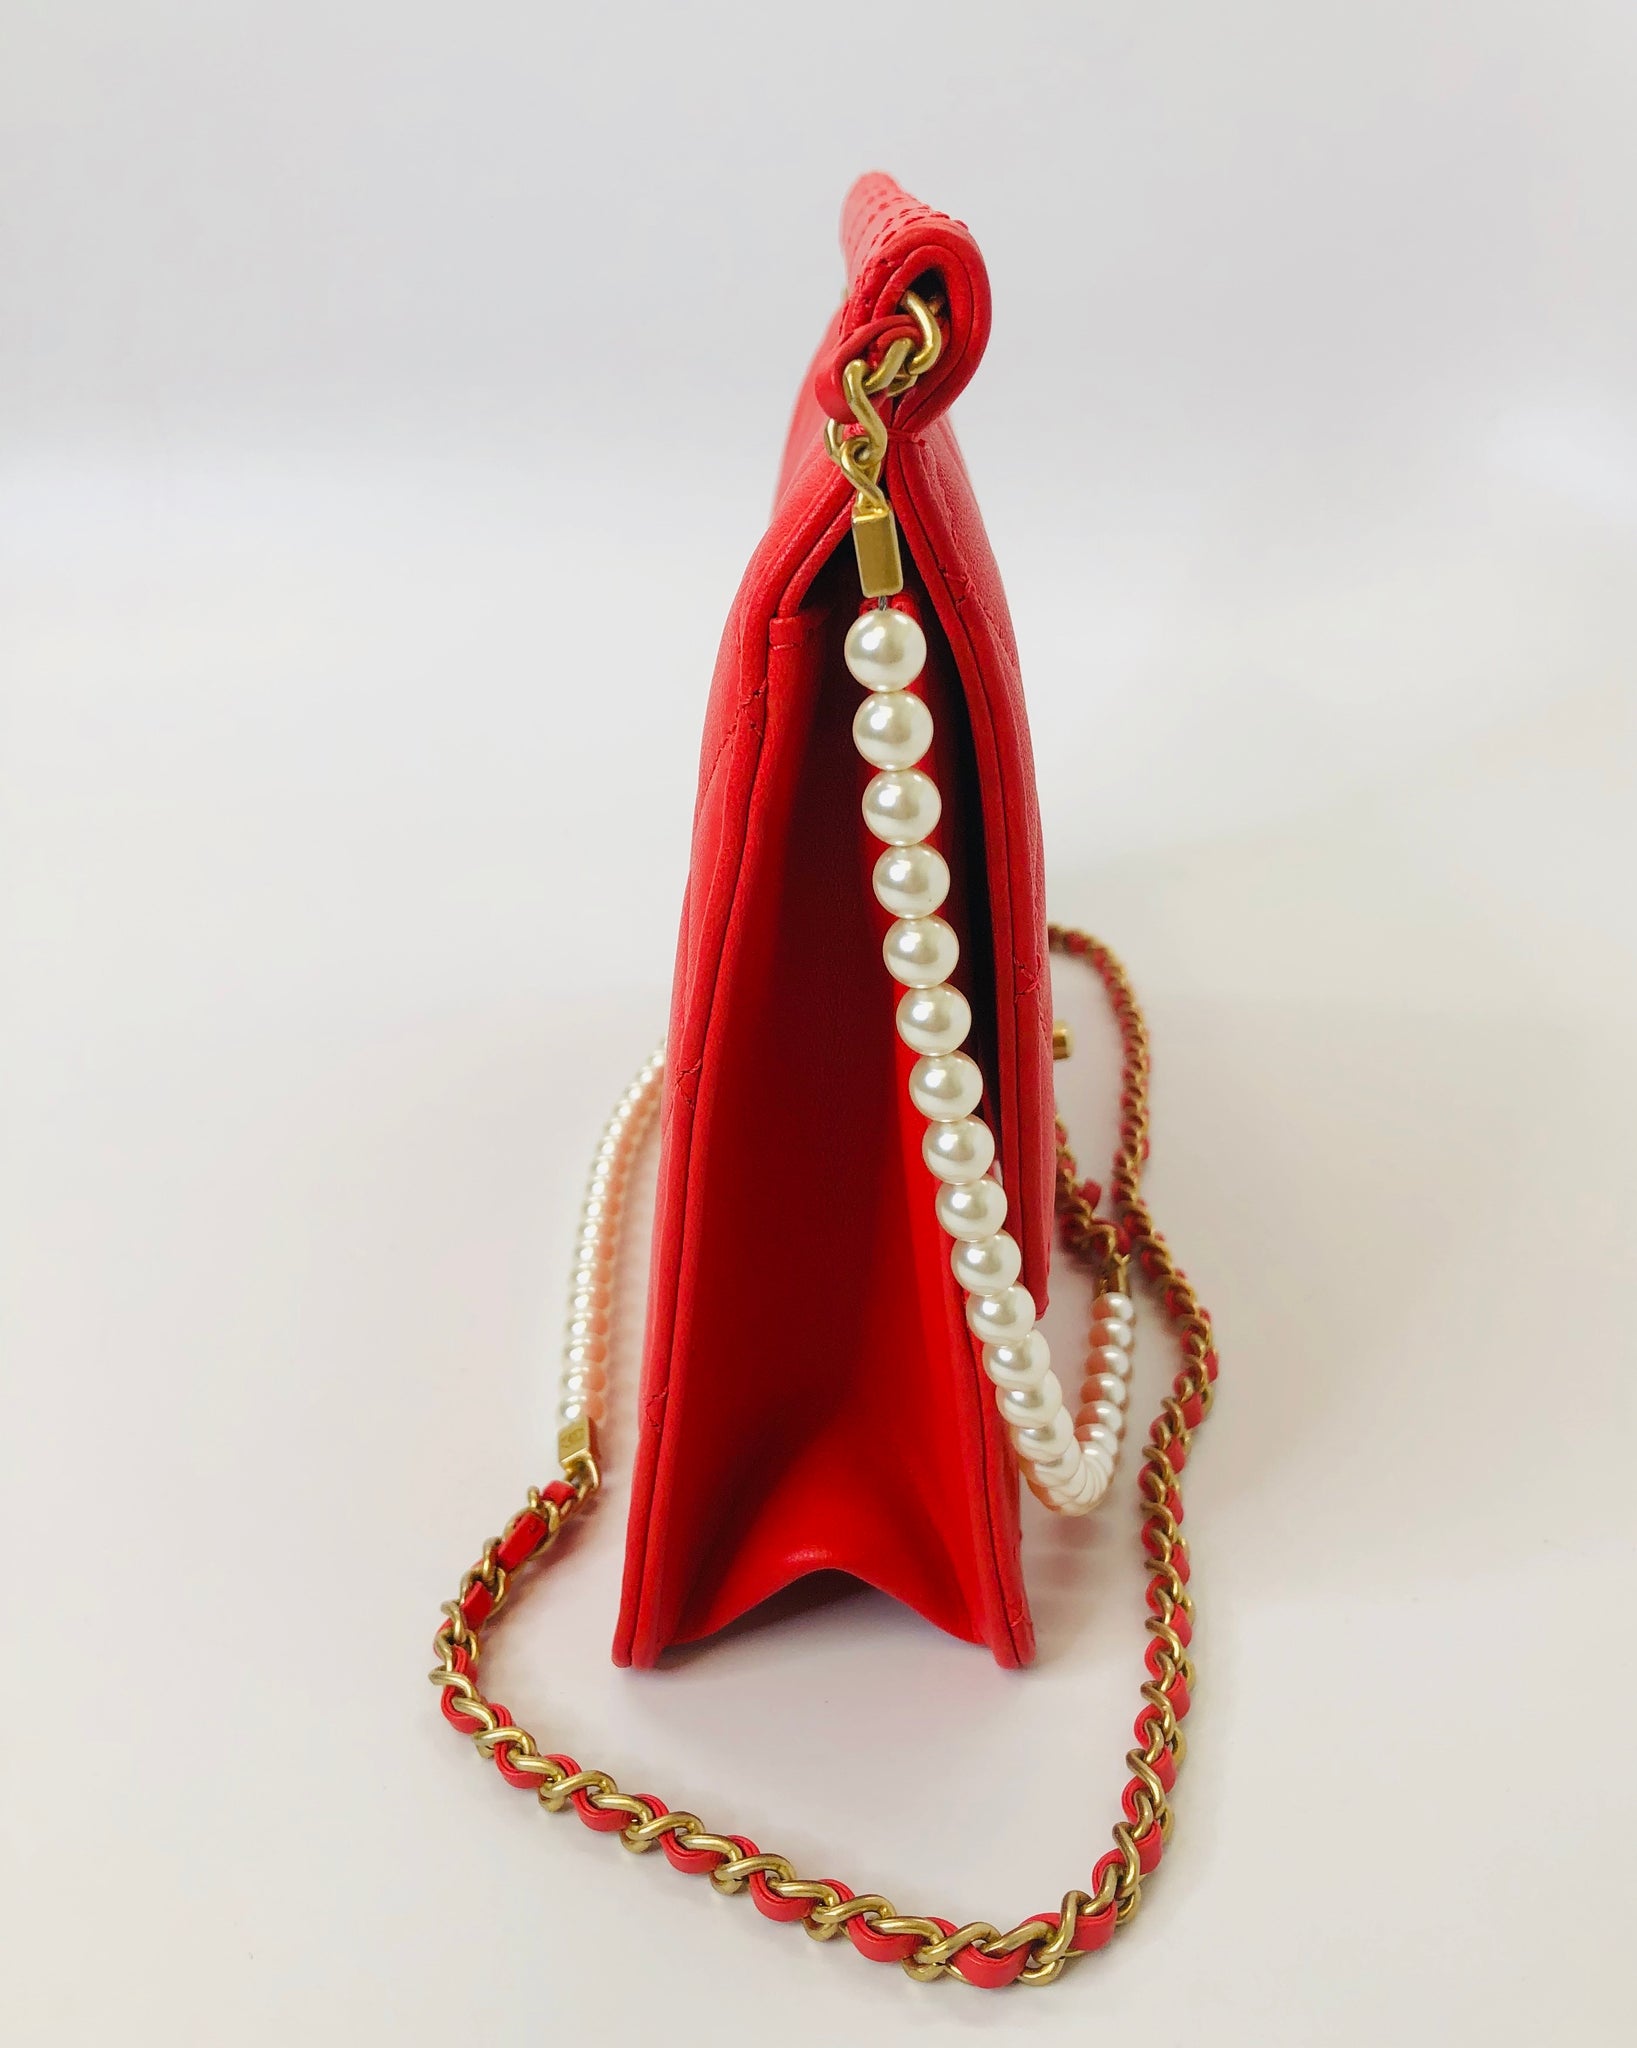 CHANEL Red Quilted Leather Flap Bag with Pearl and Chain Strap